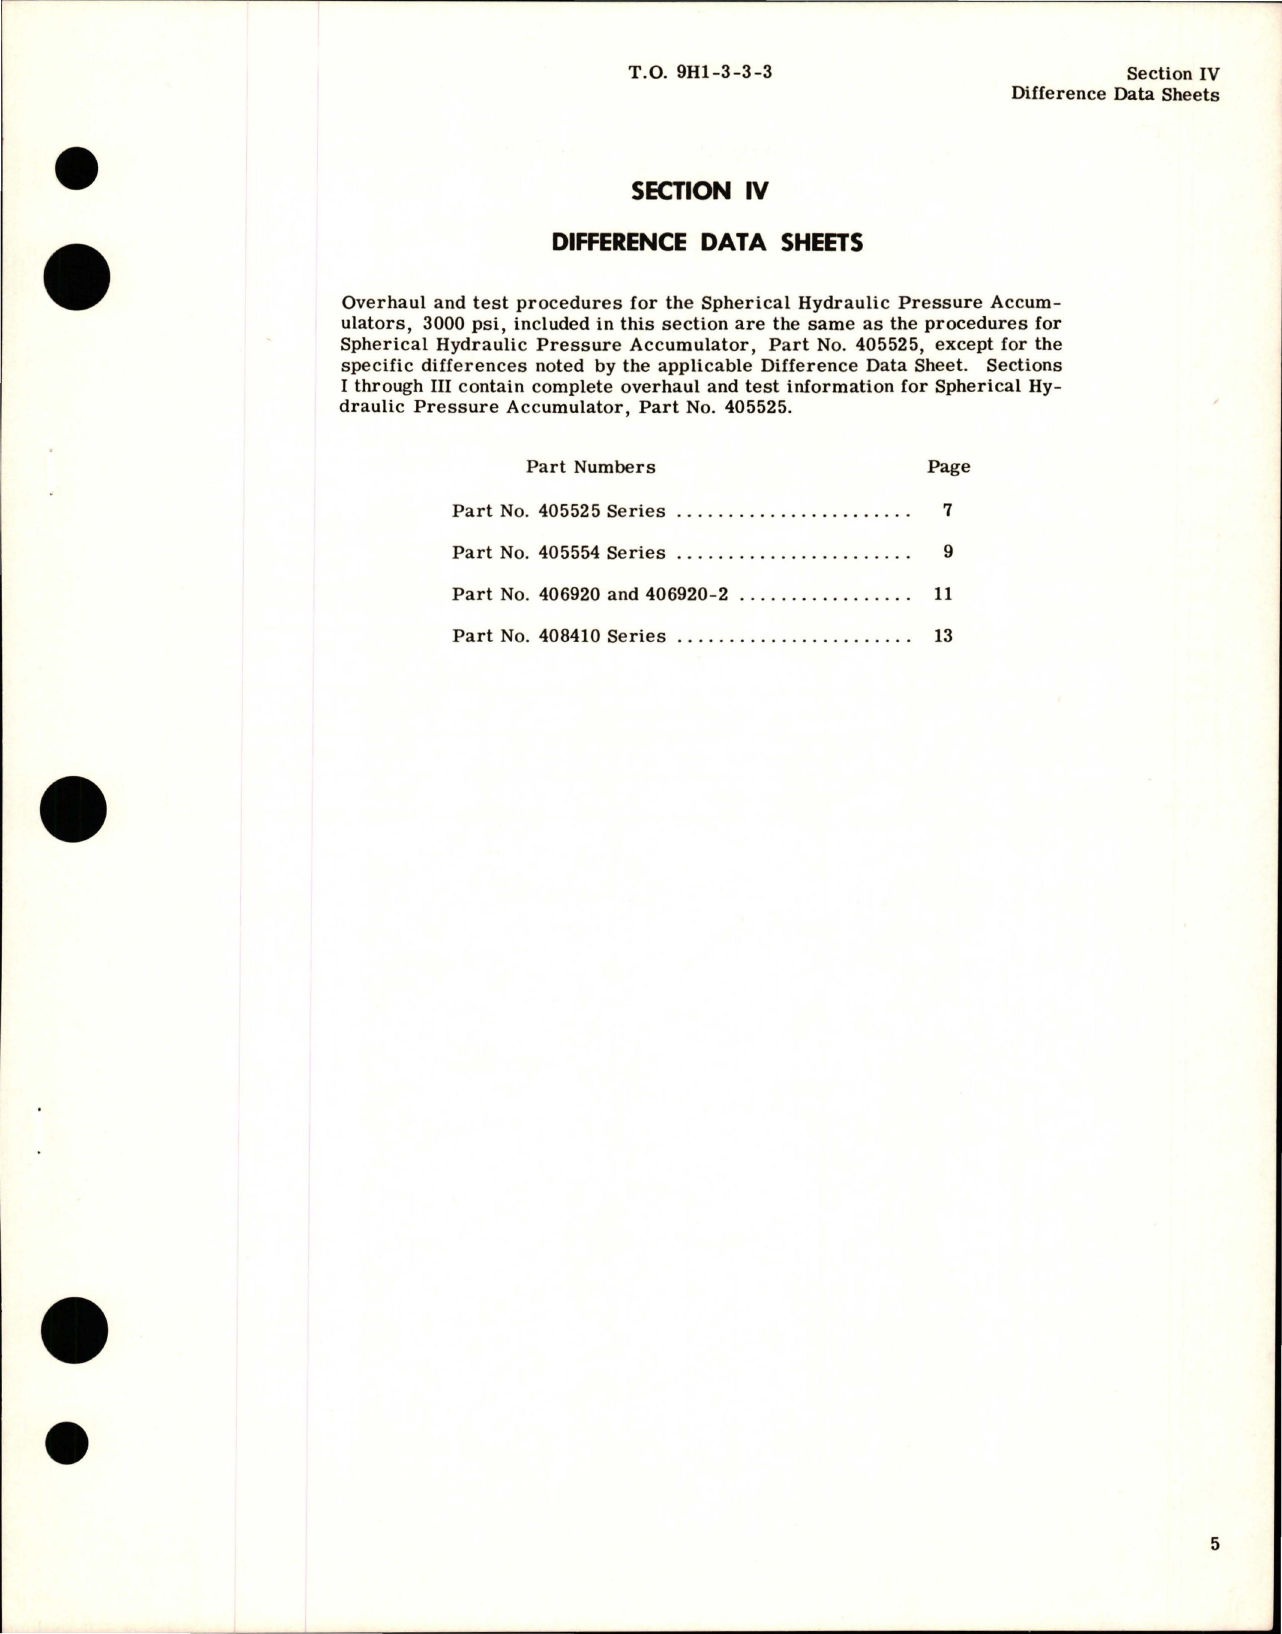 Sample page 7 from AirCorps Library document: Overhaul Instructions for Spherical Hydraulic Pressure Accumulators - 3000 PSI - Parts 405525, 405554, 406920, 406920-2, and 408410